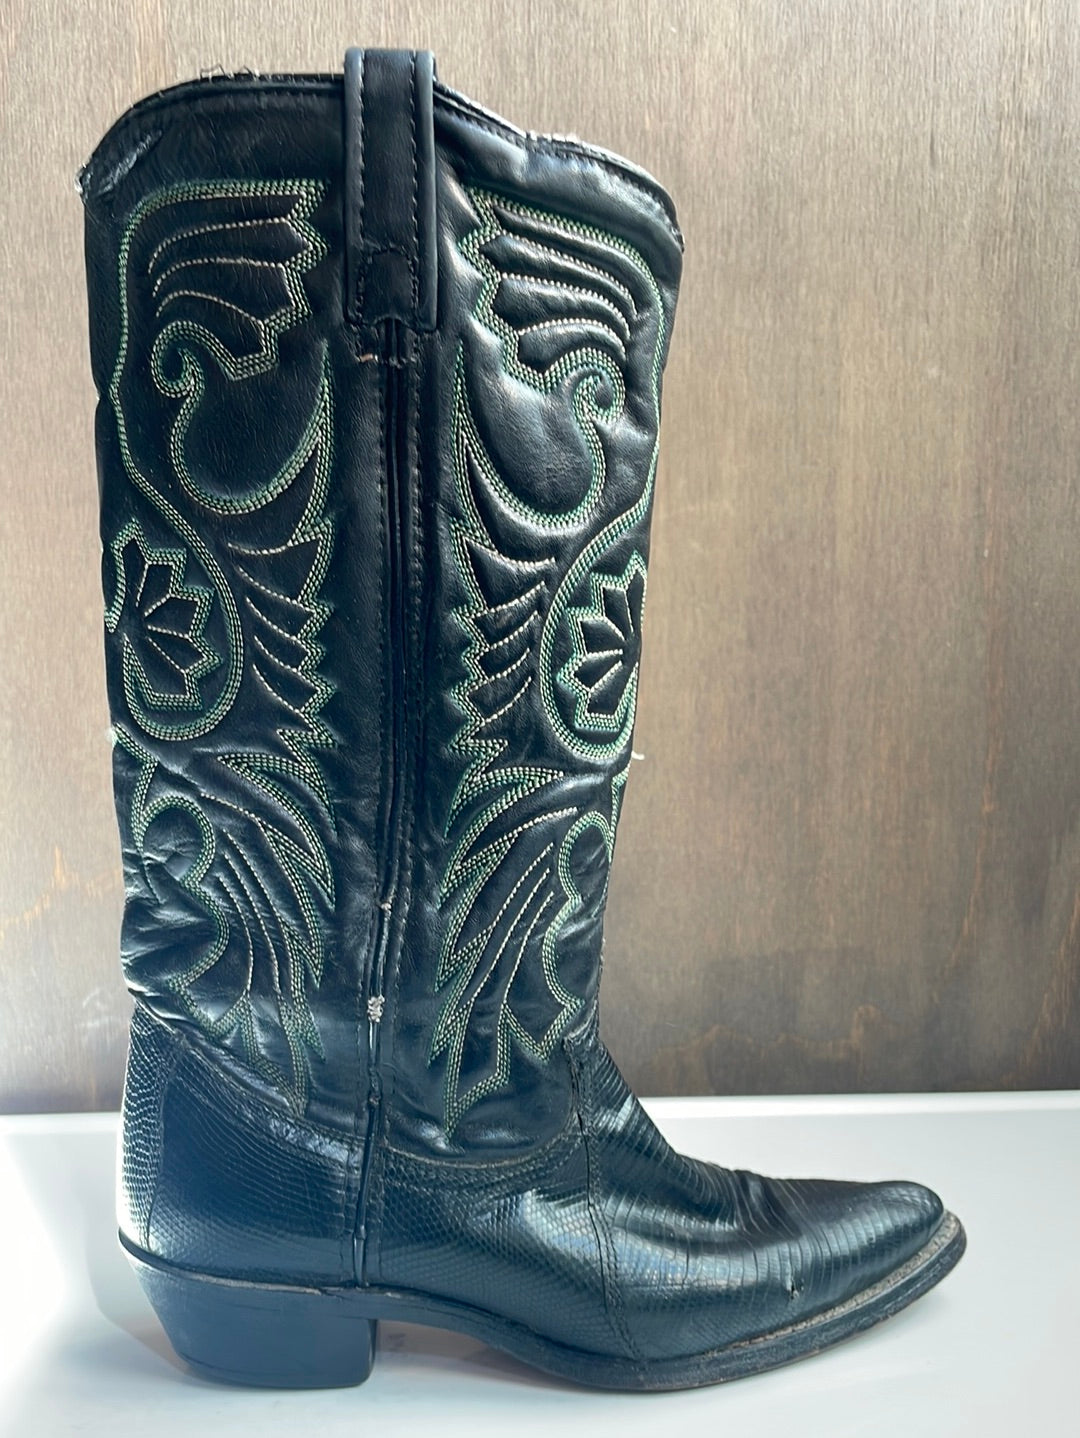 Vintage Acme Black Boots with green